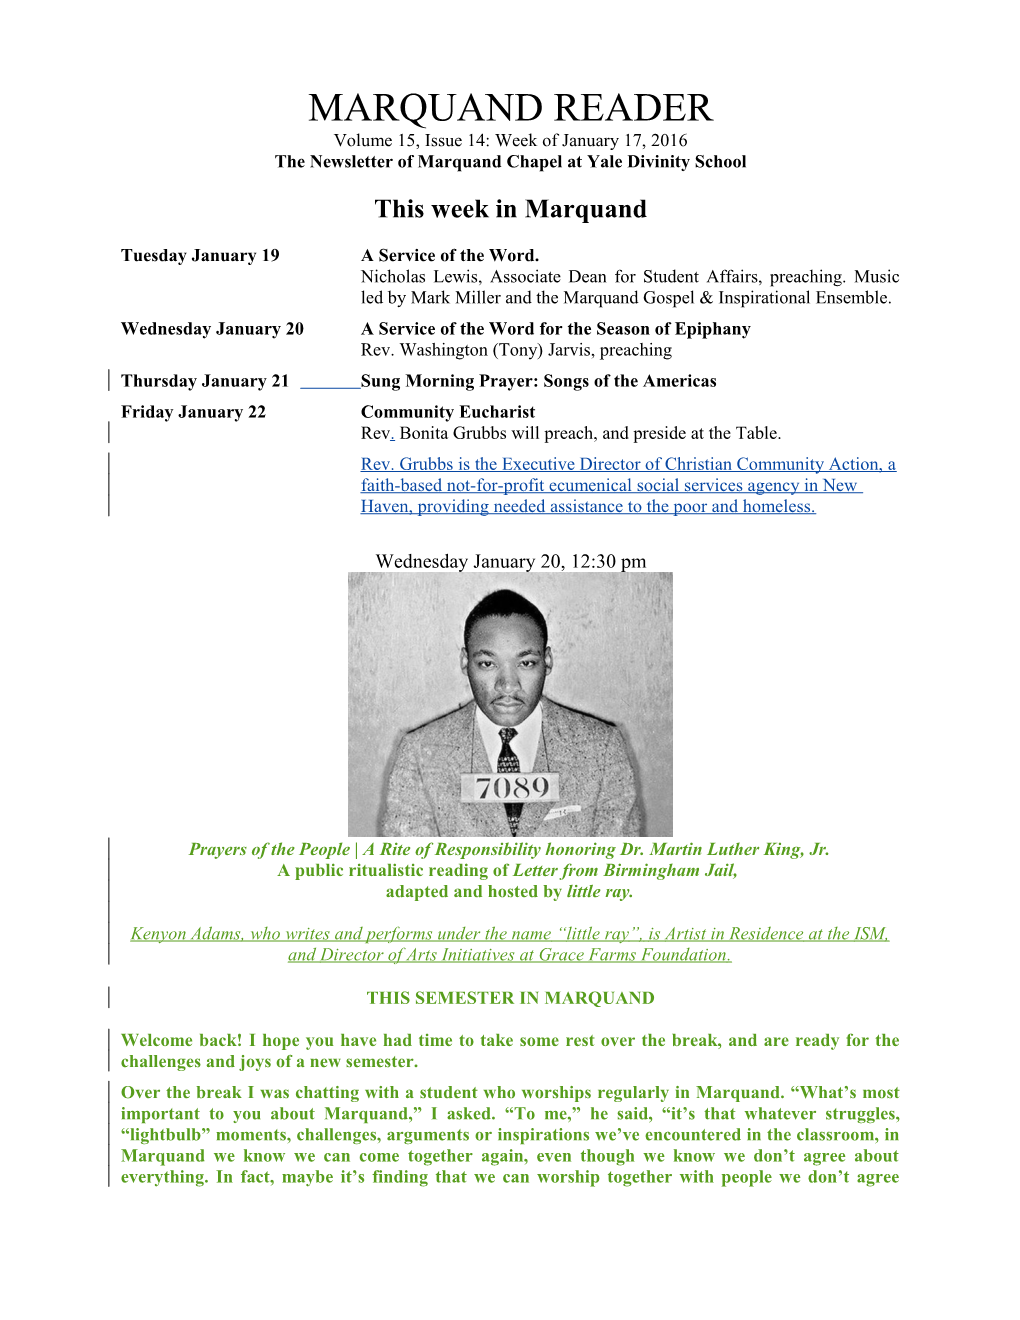 The Newsletter of Marquand Chapel at Yale Divinity School